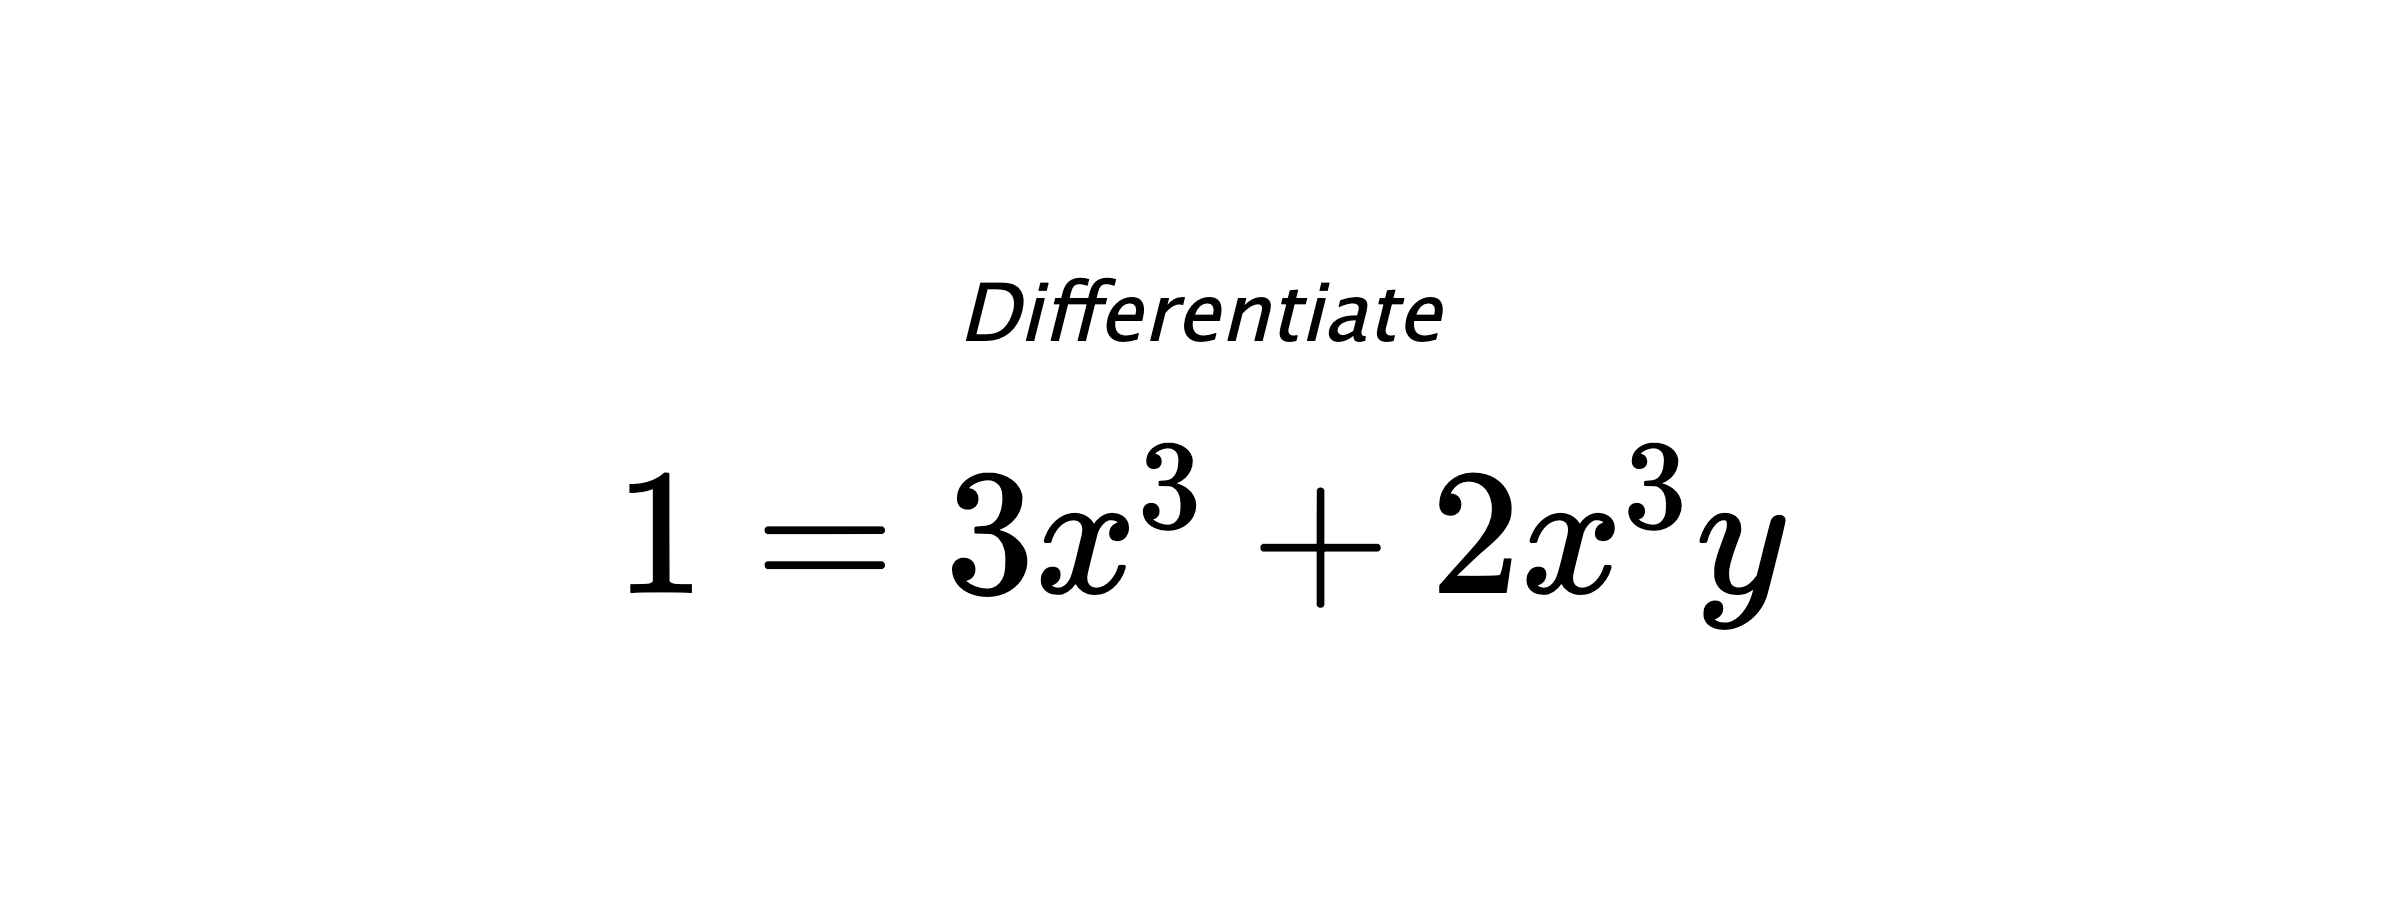 Differentiate $ 1 = 3x^3+2x^3y $